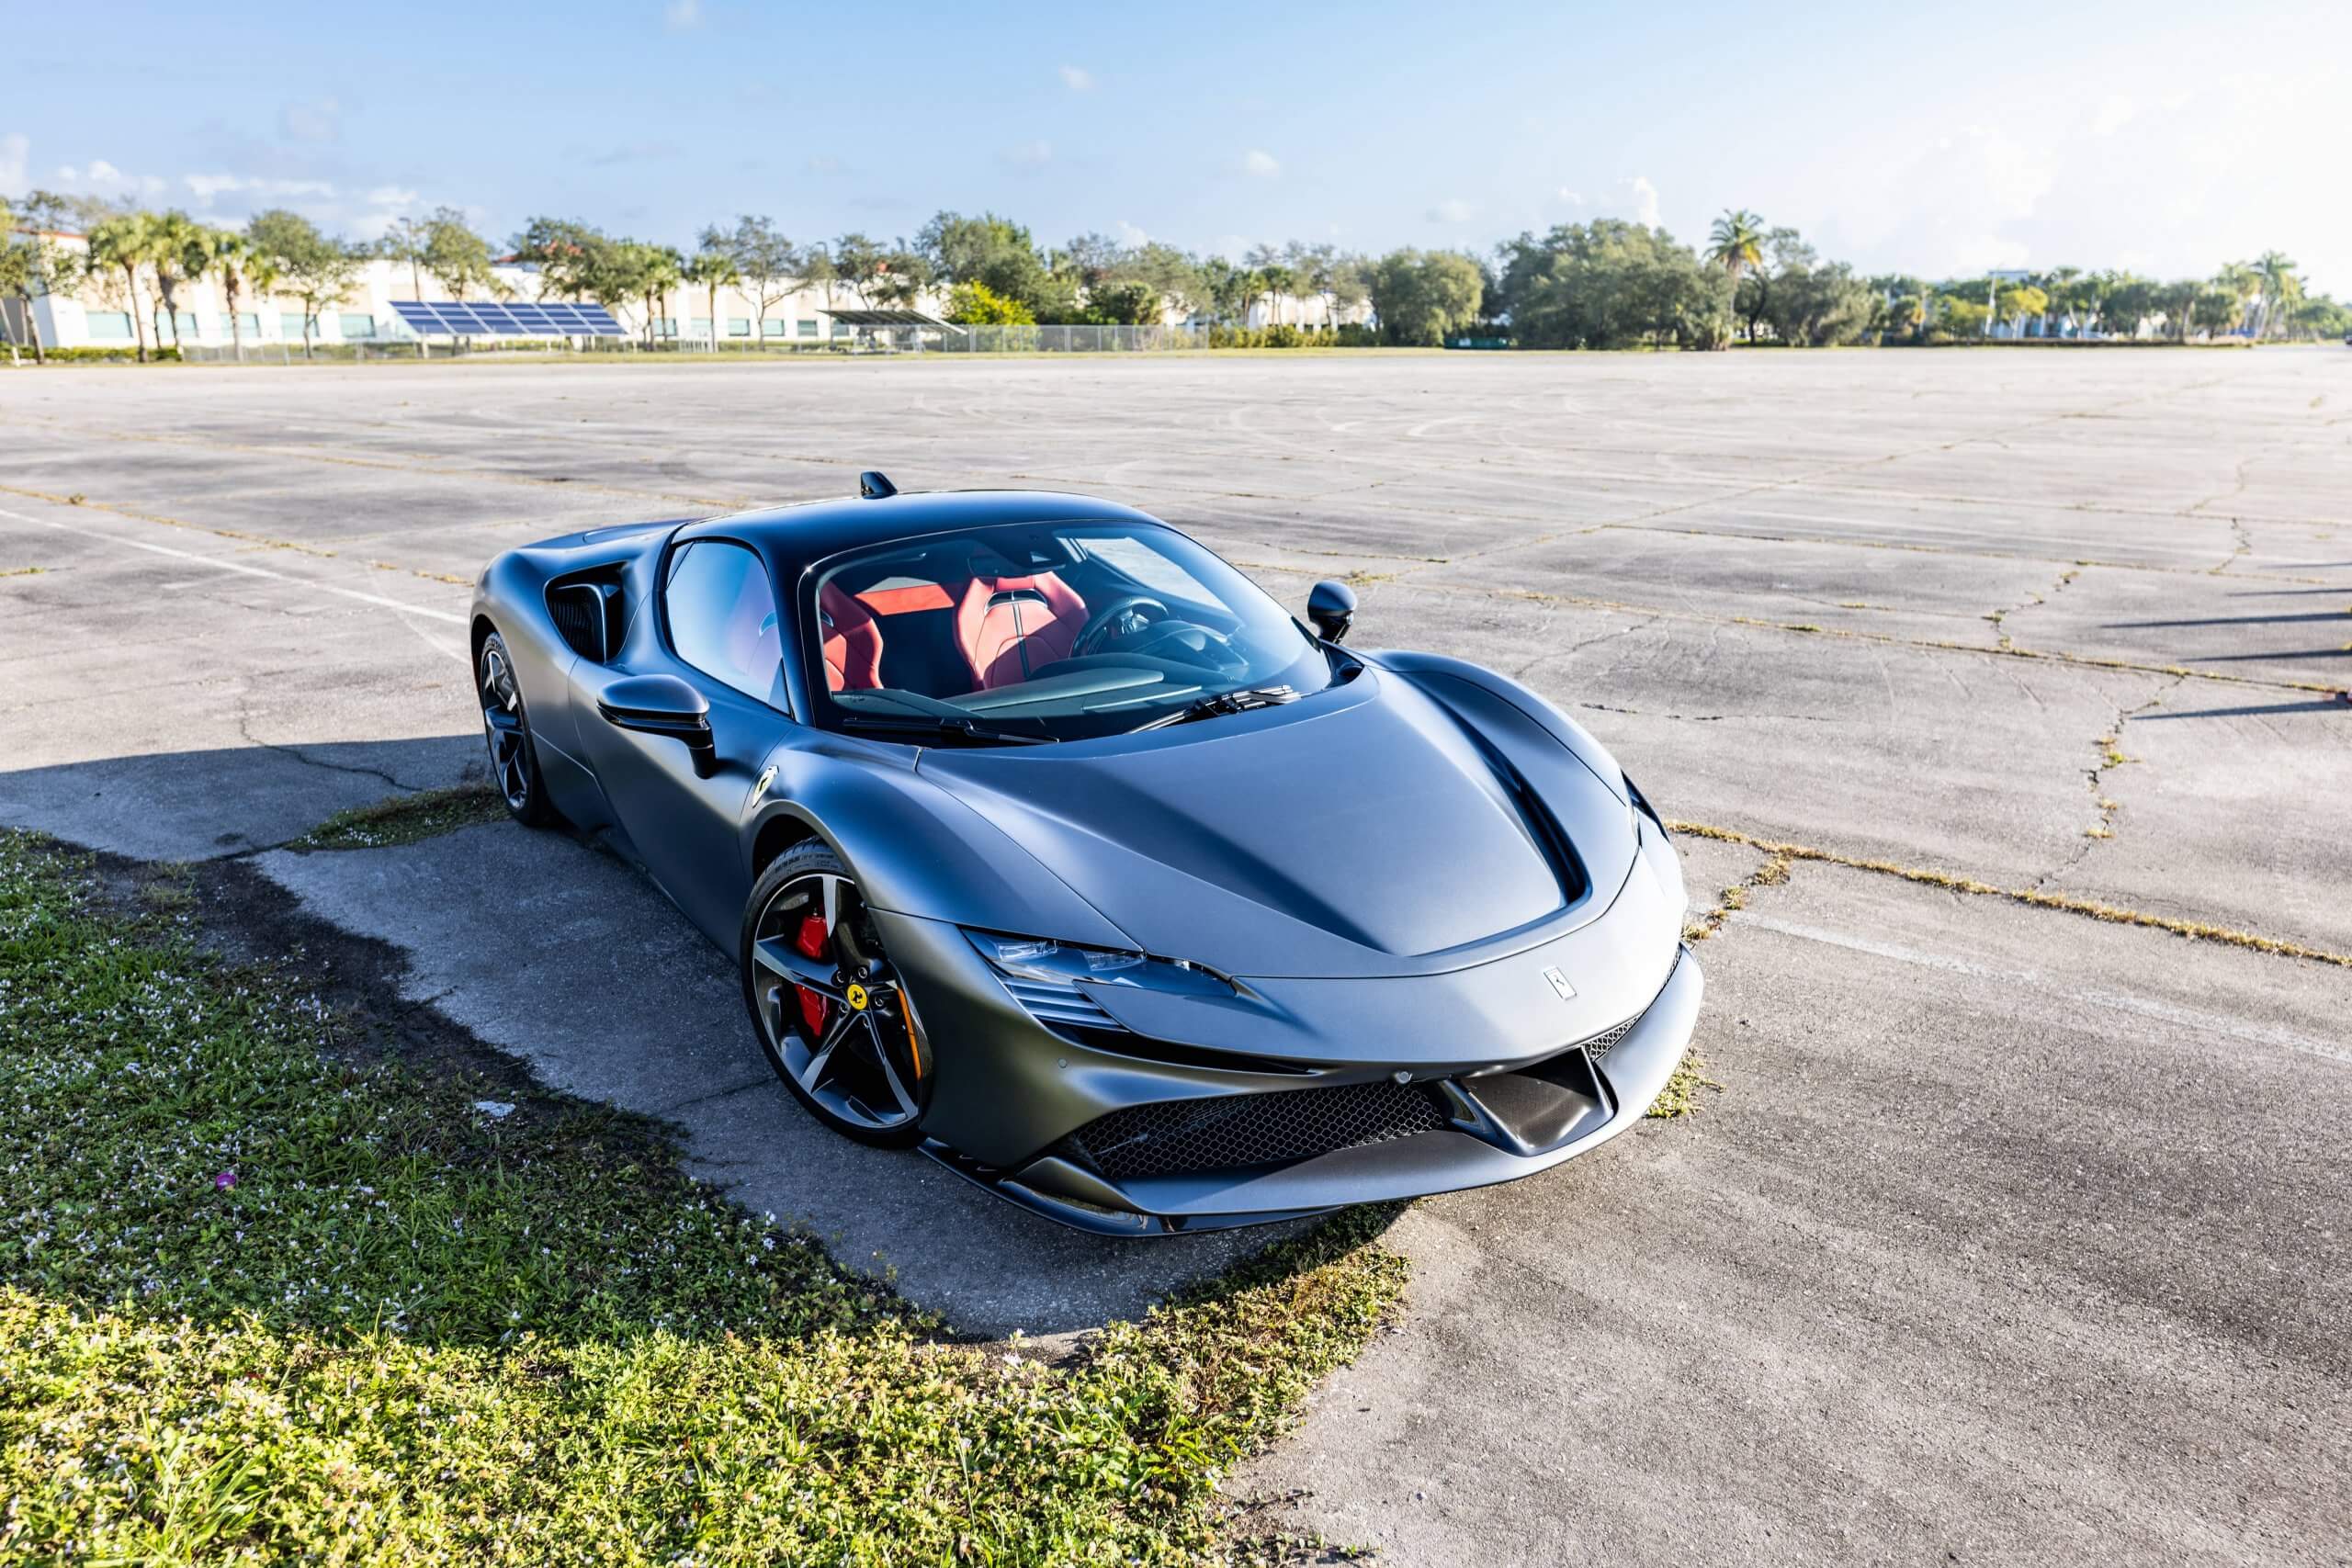 How To Buy An Exotic Car in Todays Market